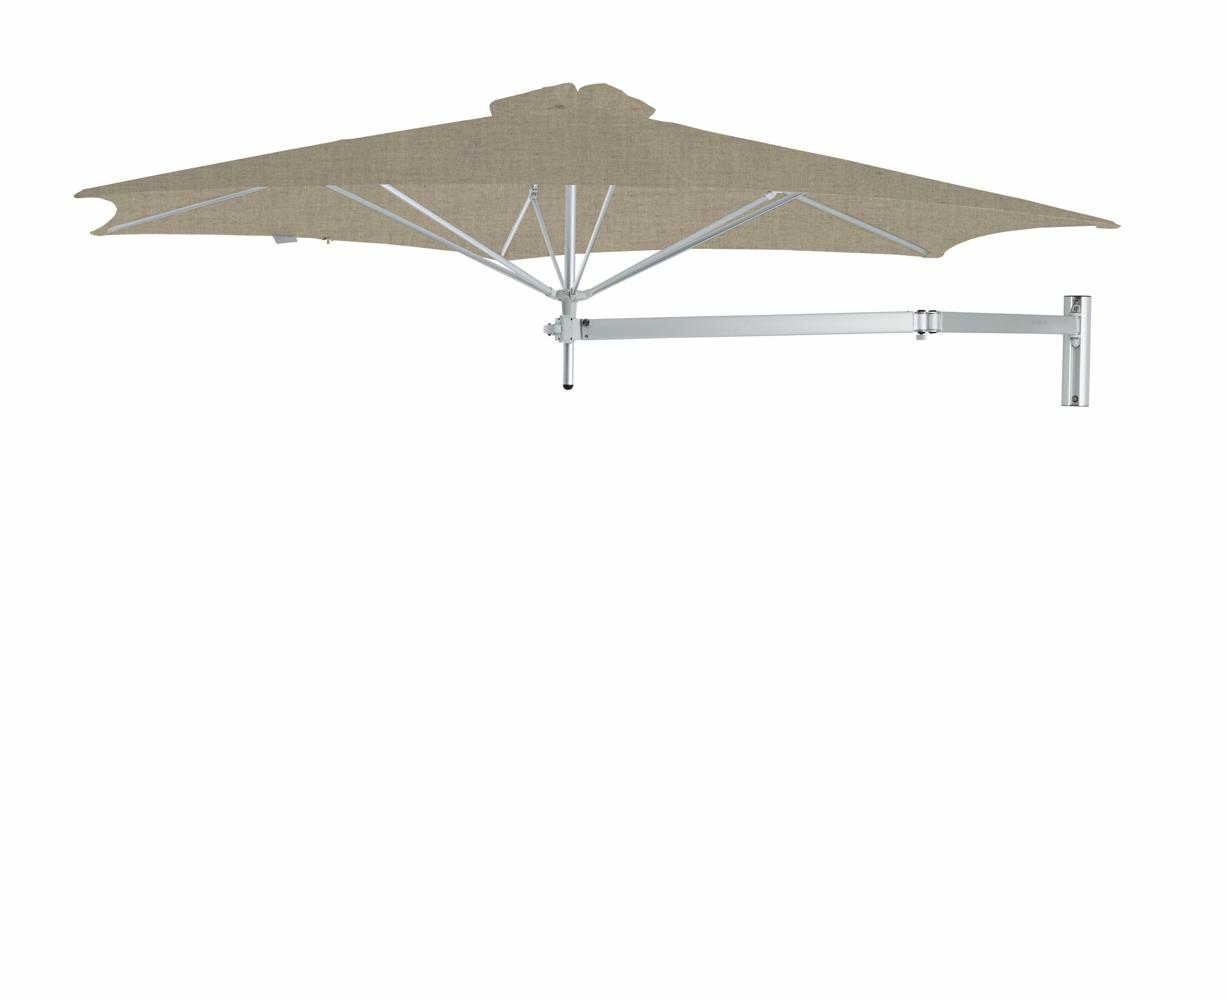 Paraflex wall mounted parasols round 3 m with SAND fabric and a Neo arm